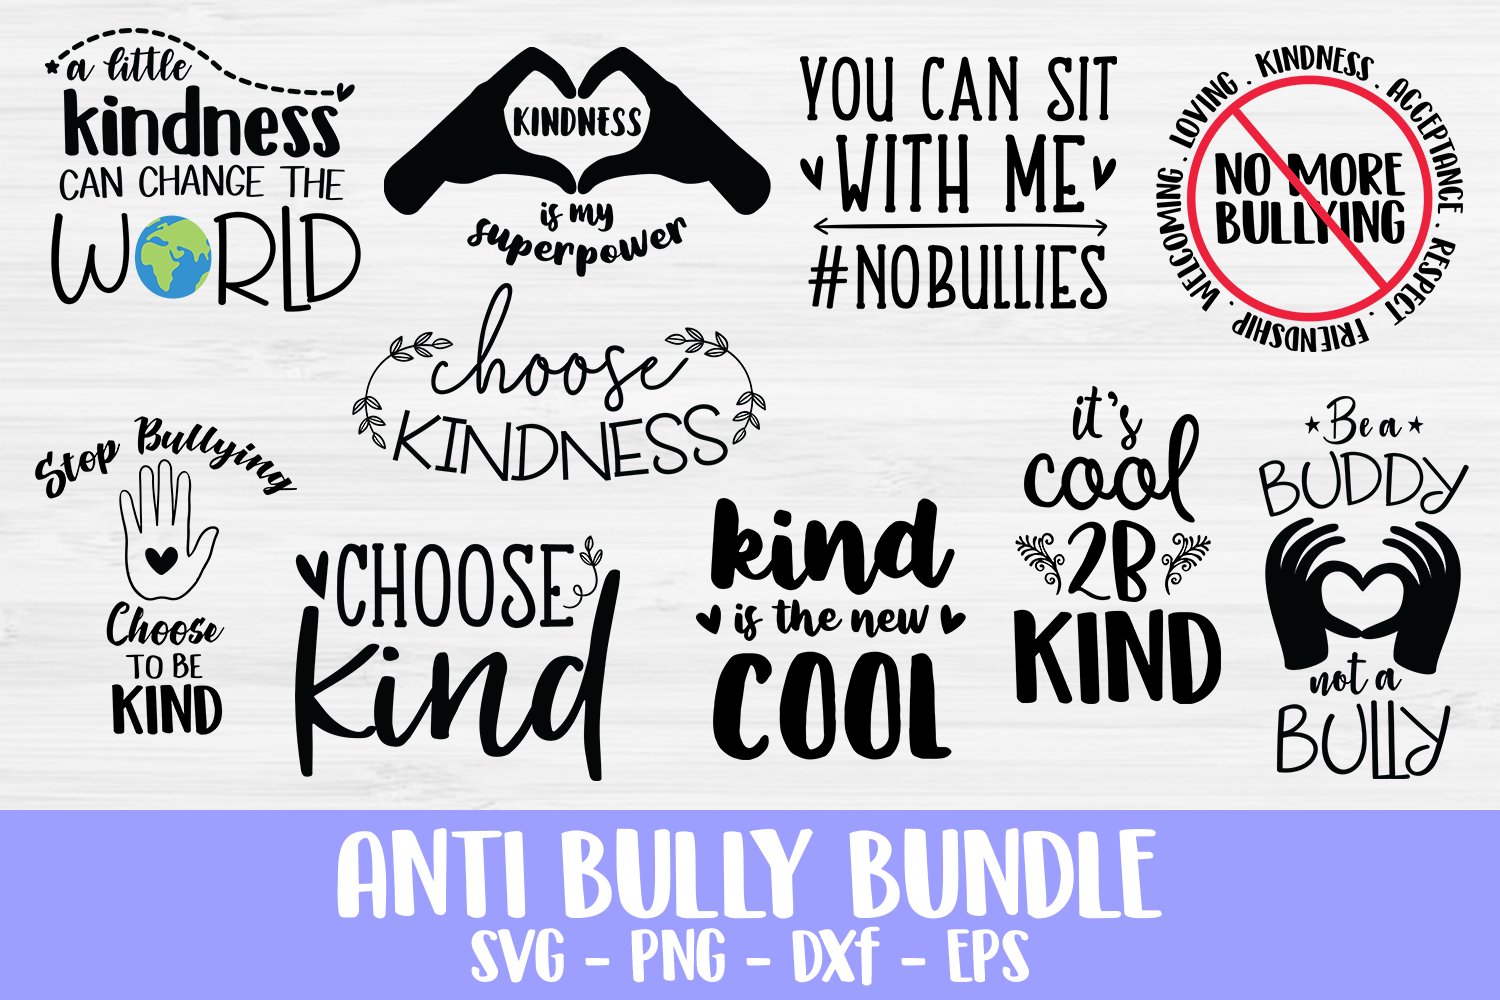 Classic anti bully quotes with different graphics.